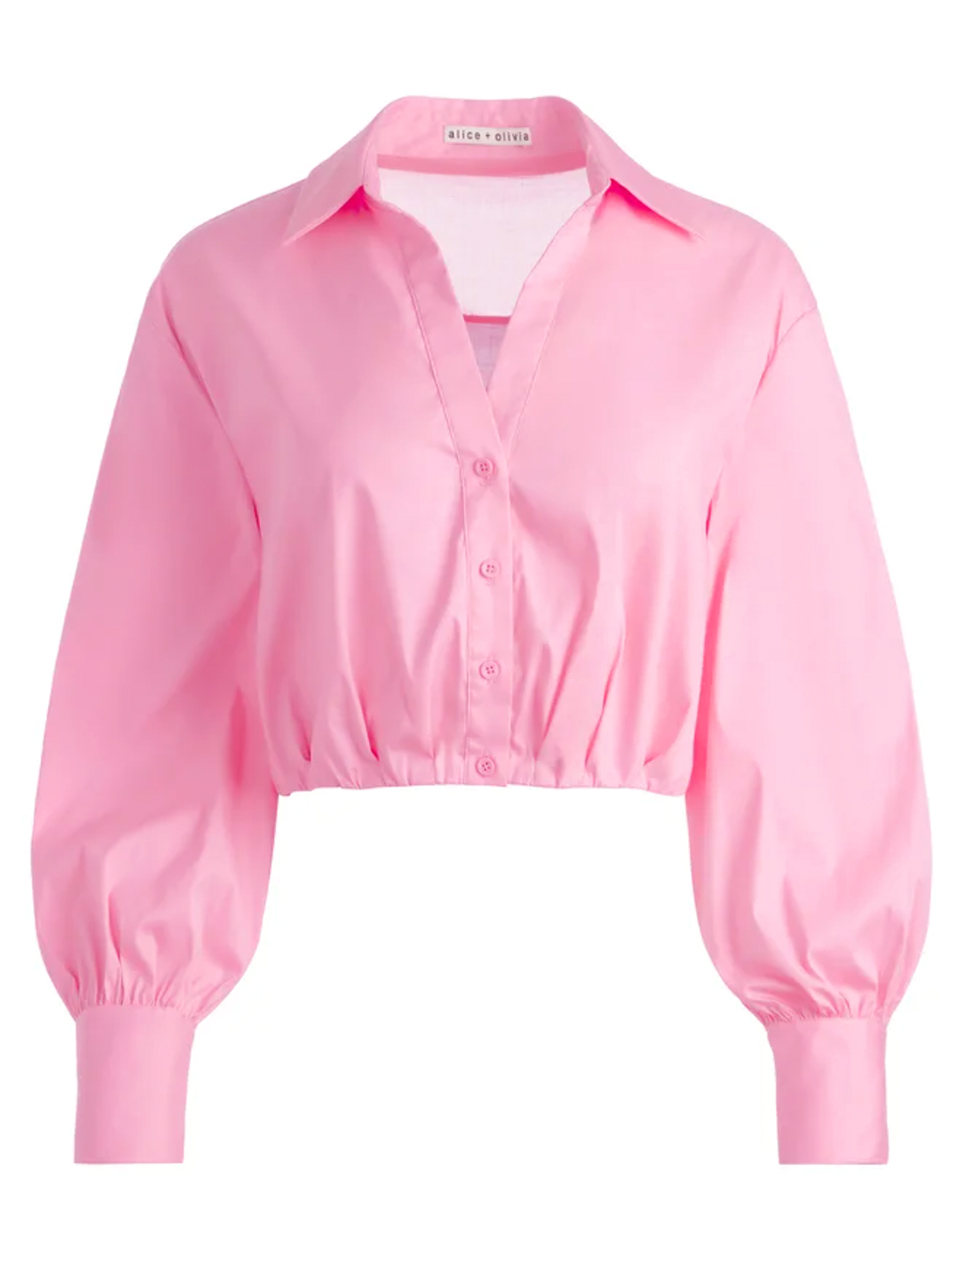 ALICE + OLIVIA Trudy Cropped Pleated Blouson Top in Cherry Blossom Product Shot 